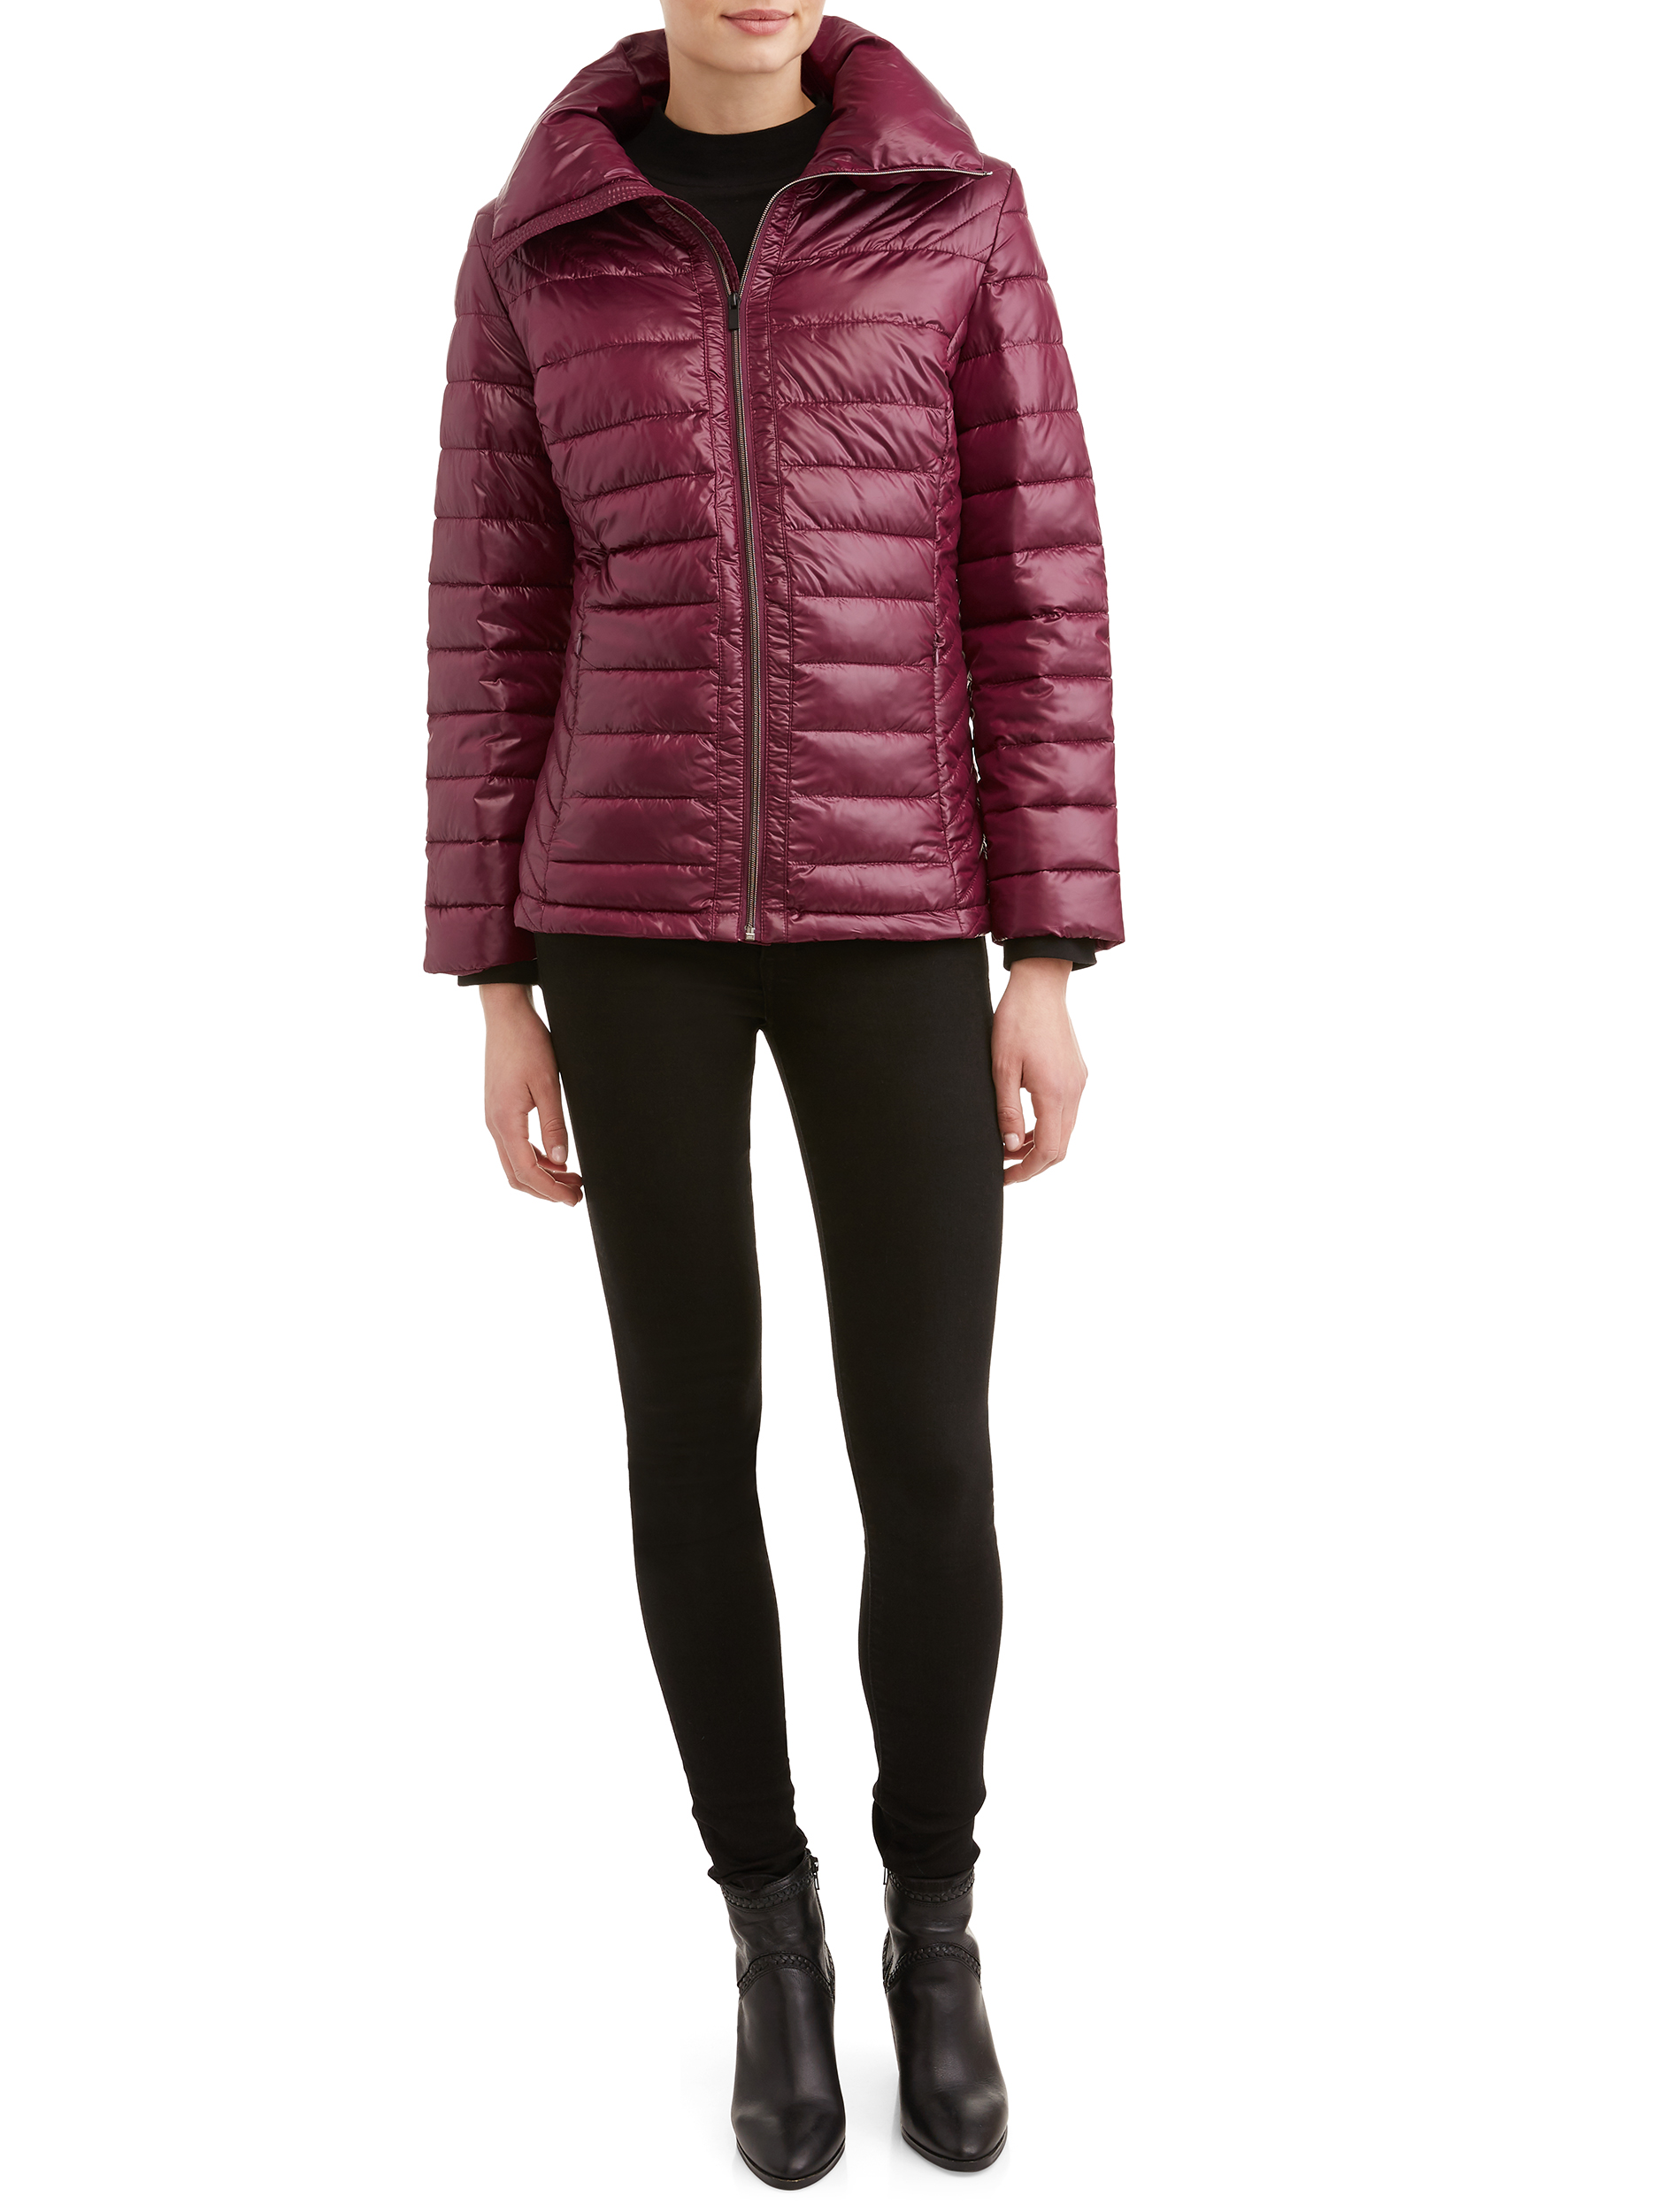 Women's Down Blend Quilted Jacket with Convertible Collar - image 2 of 5